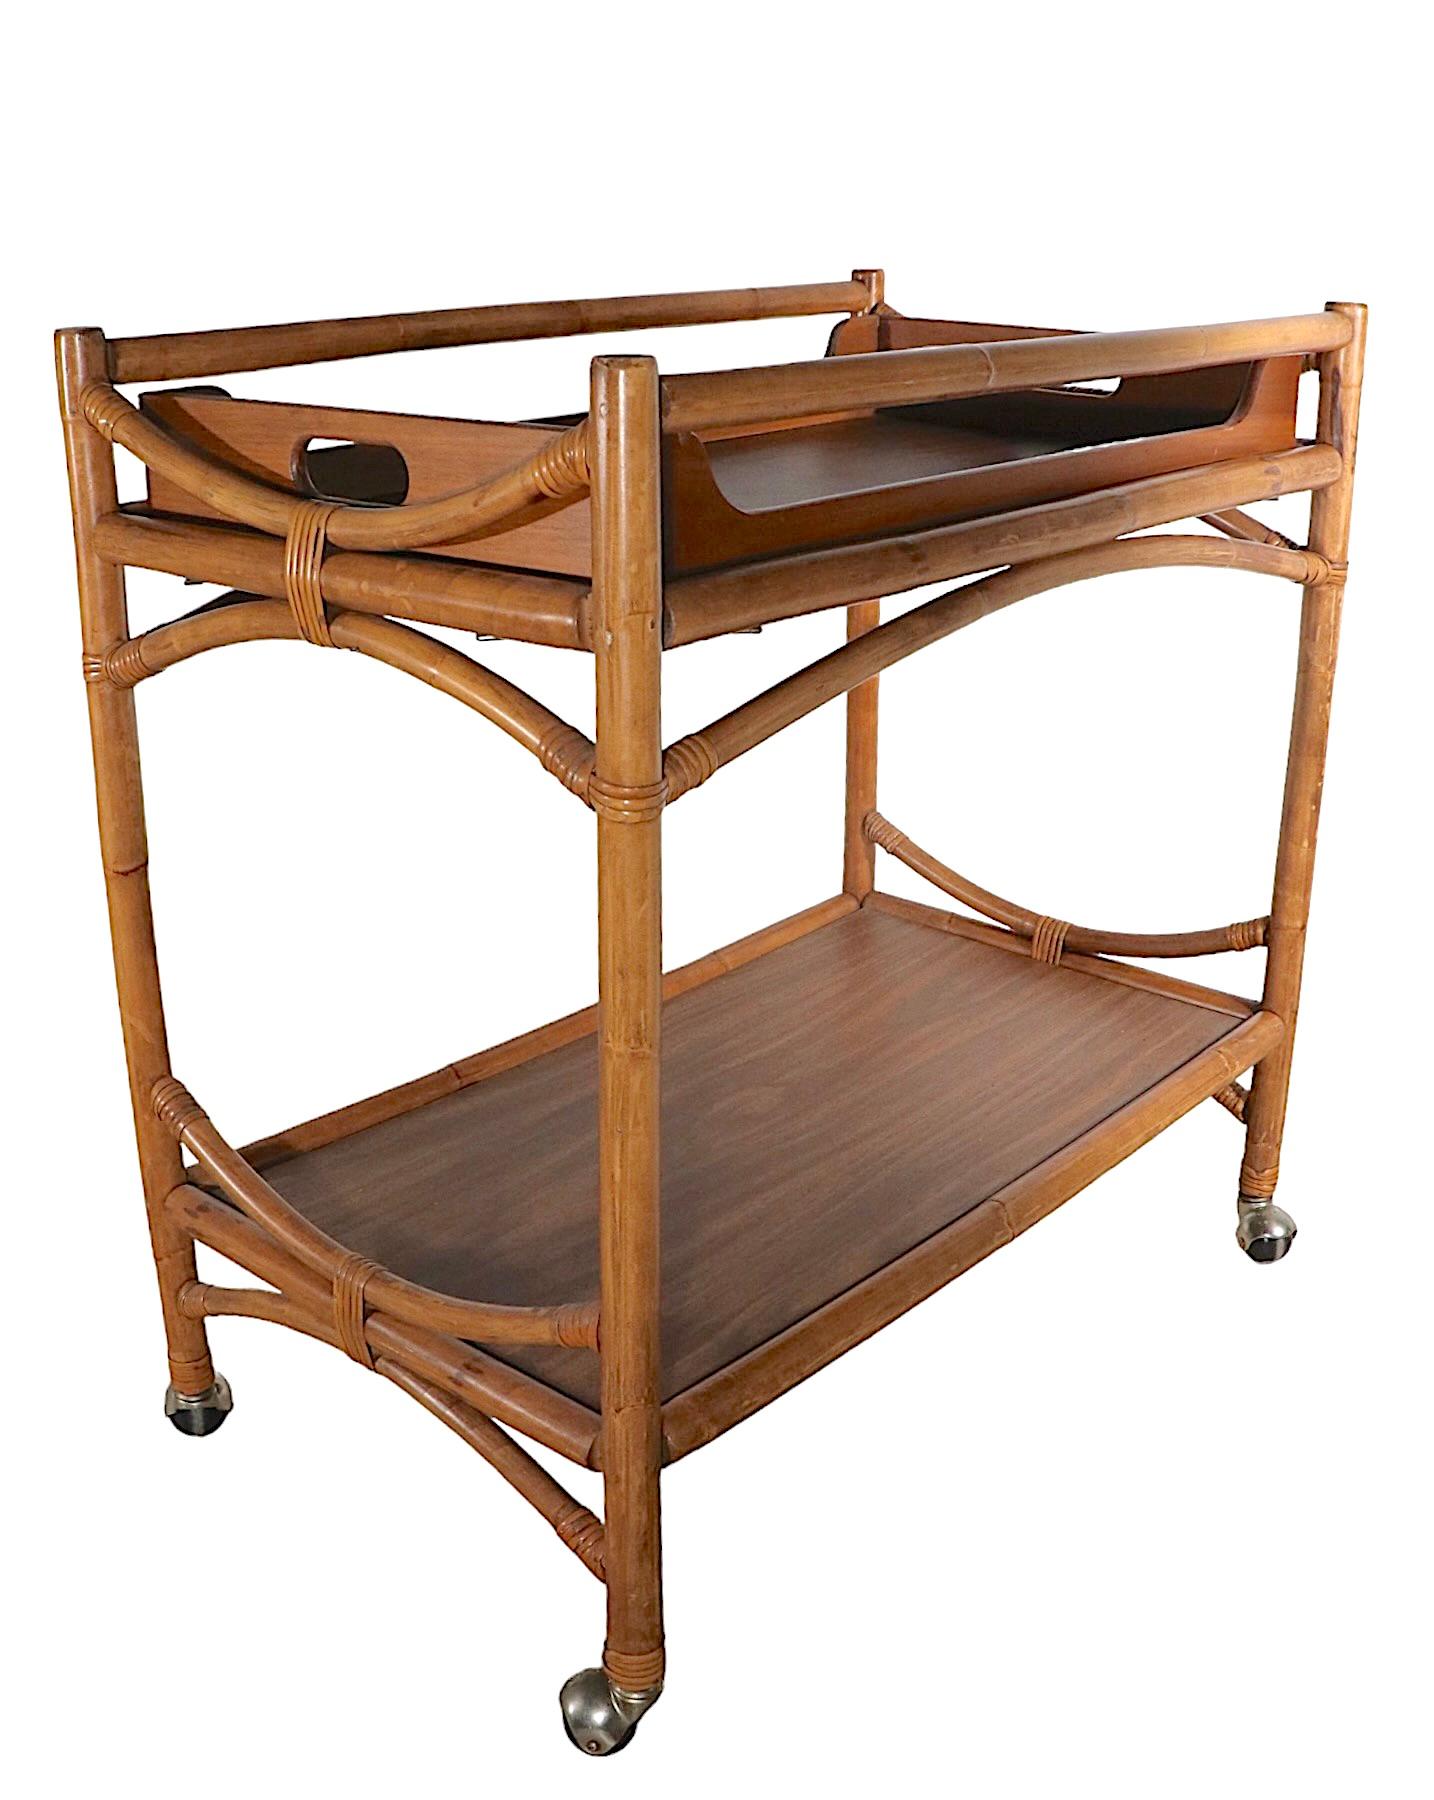 20th Century Mid-Century Bamboo Bar Serving Tea Cart with Removable Serving Tray, 1950/1960s For Sale